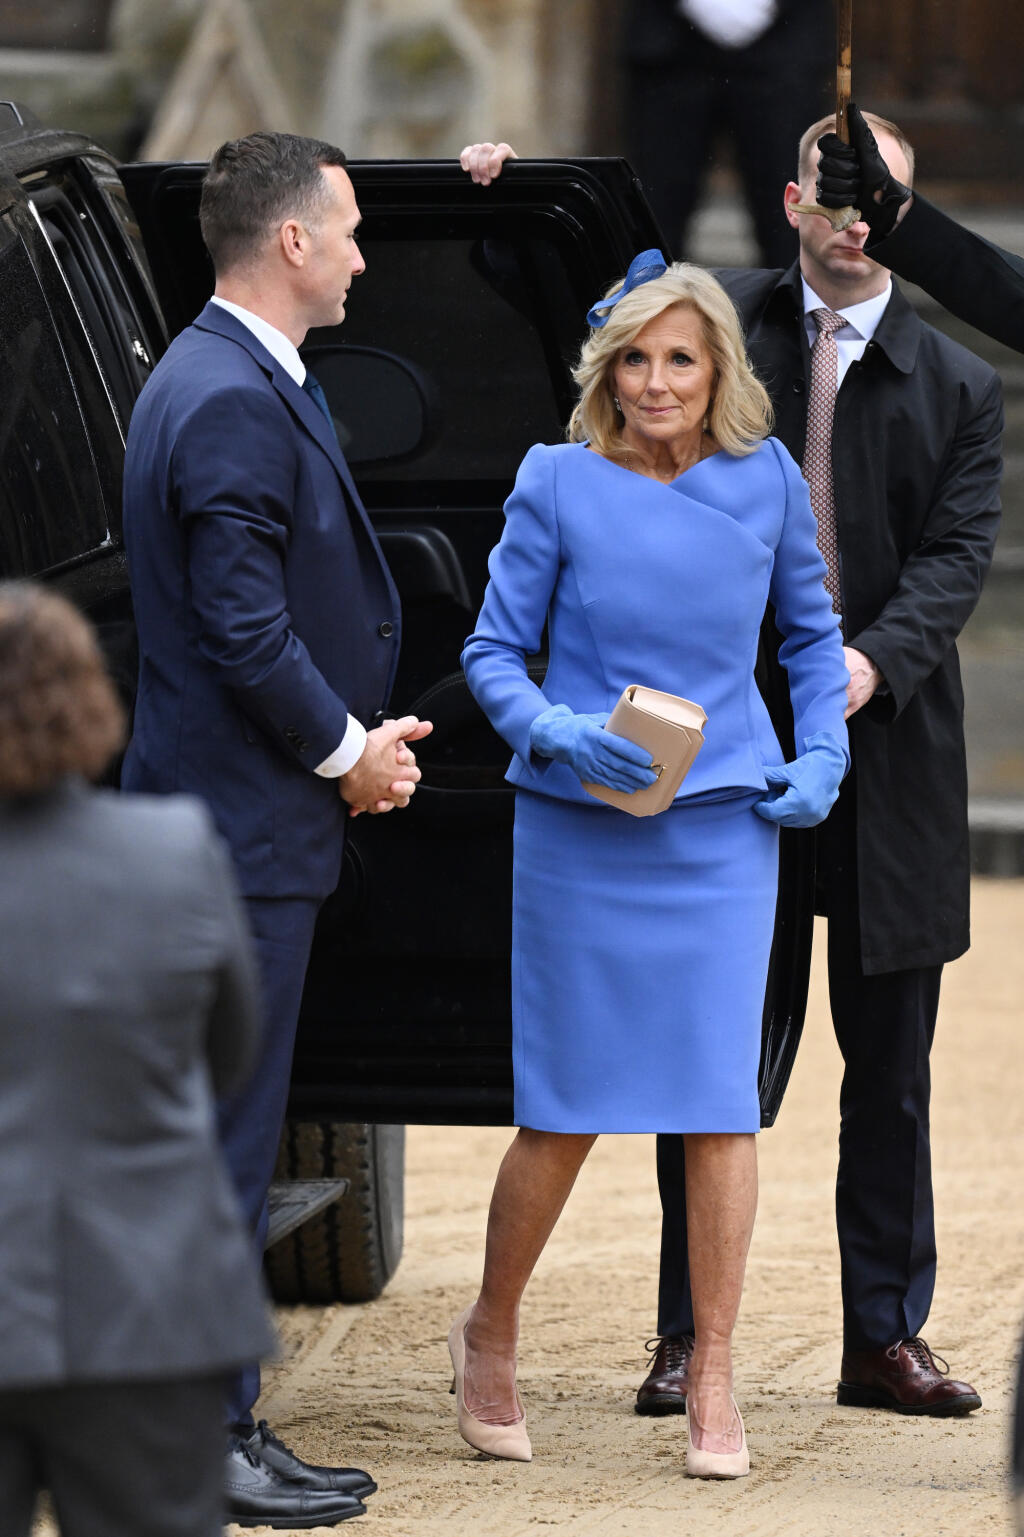 The wife of the US president, Jill Biden, arrived at Westminster Abbey.